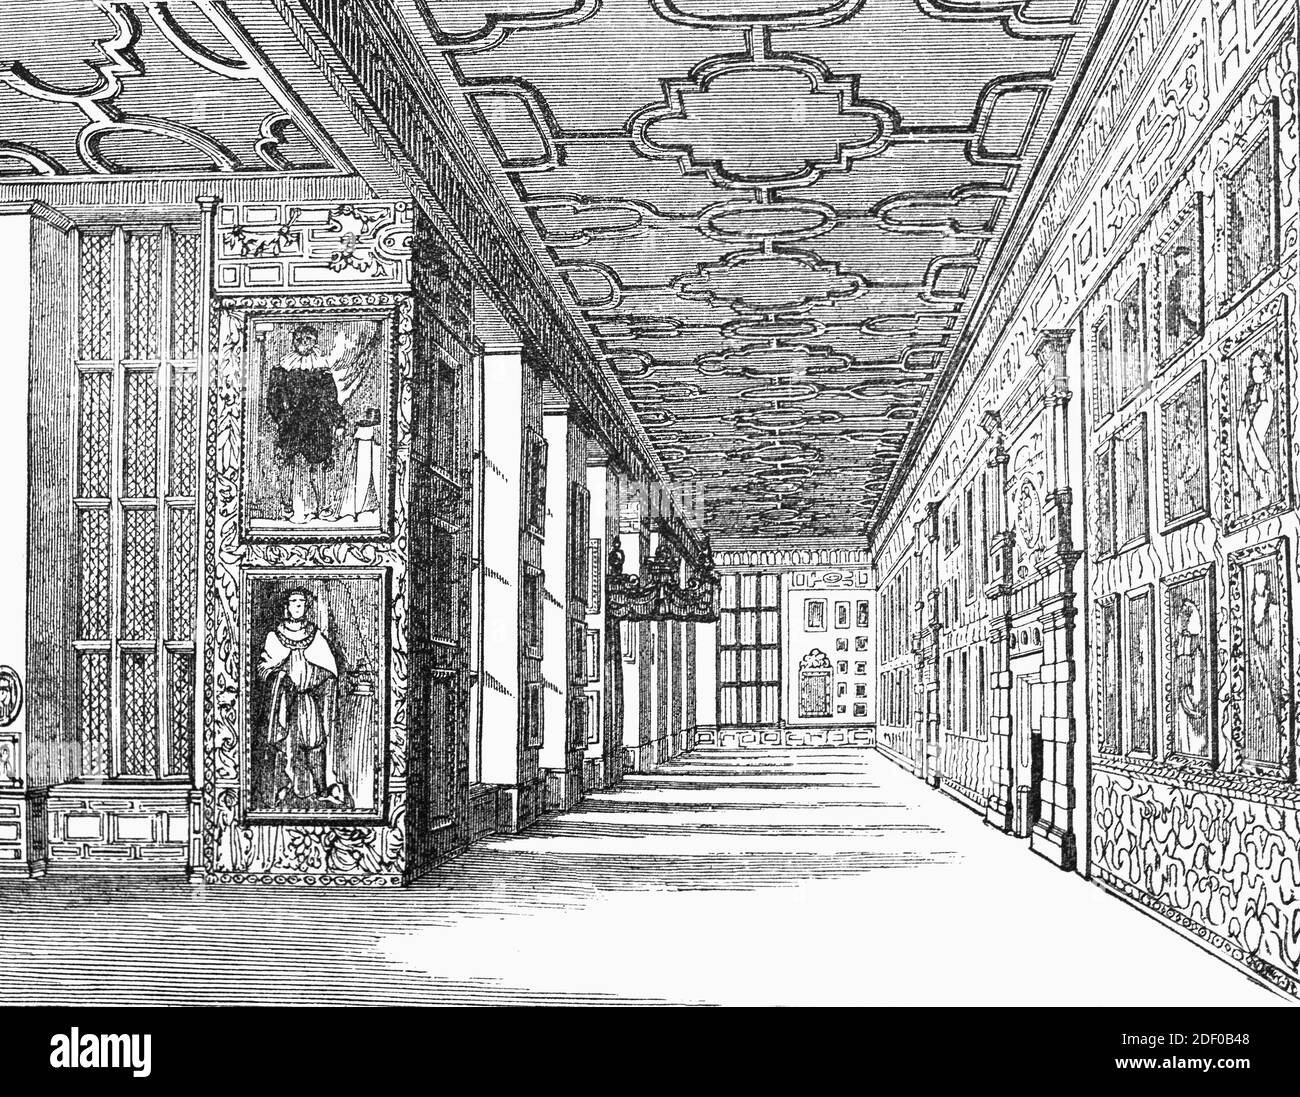 A 19th Century view of the portrait gallery in Hardwick Hall an example of the Elizabethan prodigy house in Derbyshire, England. It was built between 1590 and 1597 for the formidable Bess of Hardwick, the richest woman in England after Queen Elizabeth I, a conspicuous statement of her wealth and power.  After Bess's death in 1608, the house passed to her son William Cavendish, 1st Earl of Devonshire. The Devonshires made Chatsworth, another of Bess's great houses, their principal seat and Hardwick was relegated to the role of an occasional retreat for hunting and sometime dower house. Stock Photo